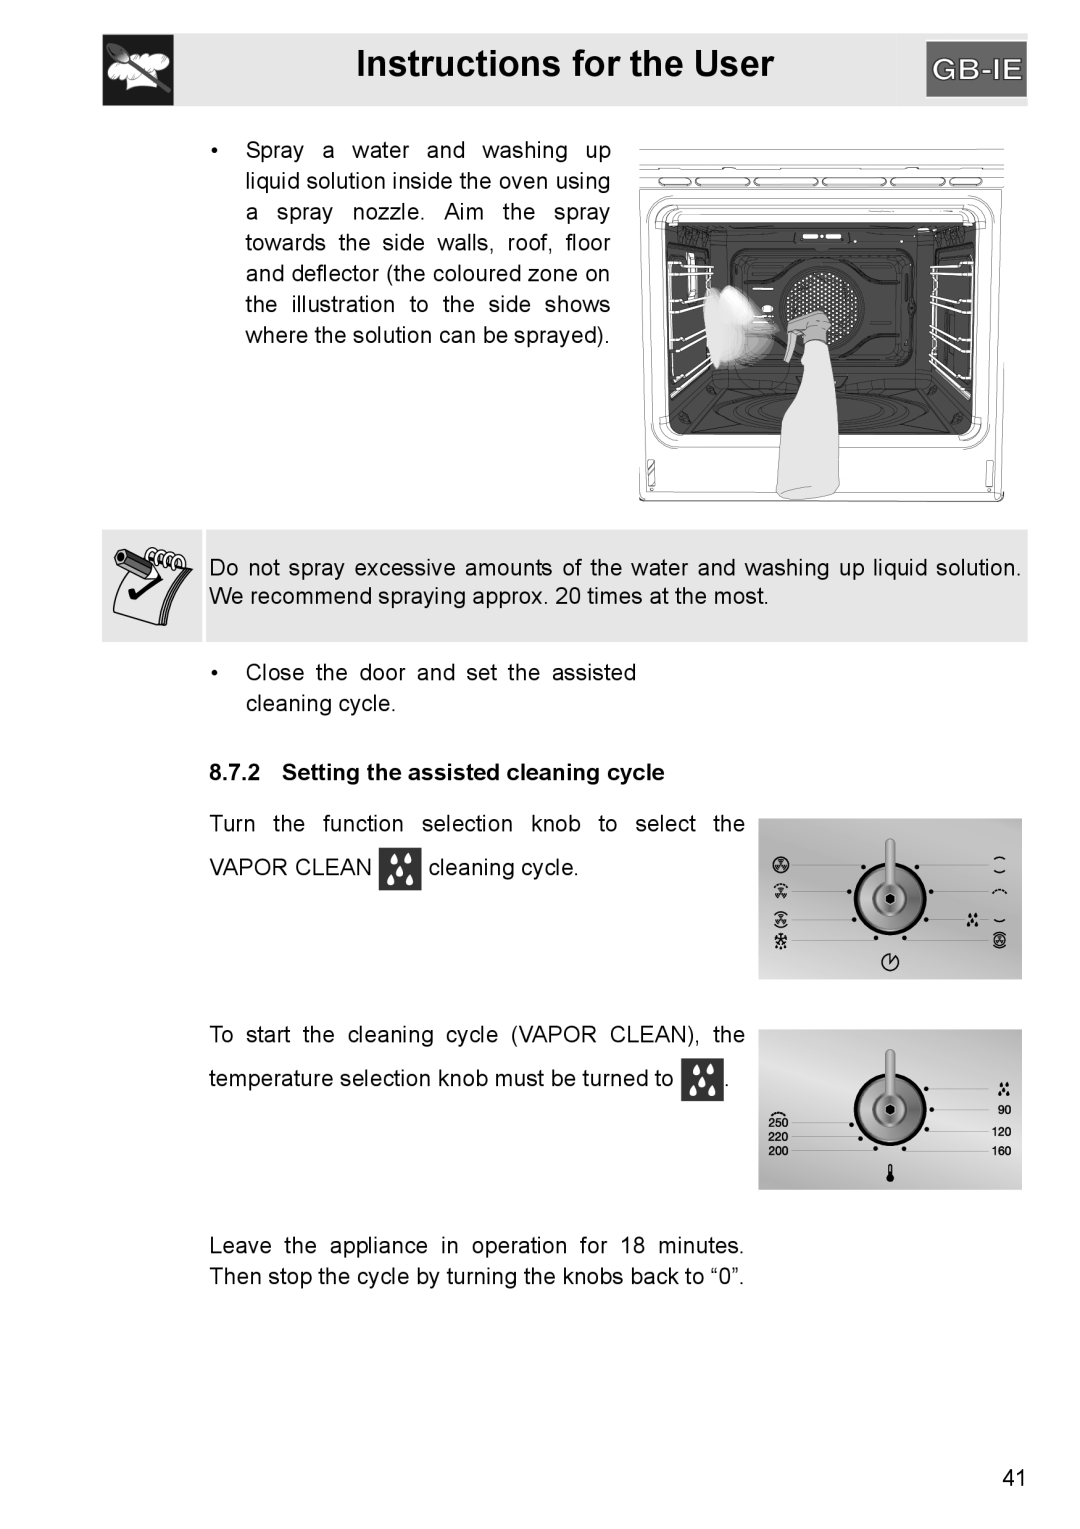 GE SA304X-8 manual Instructions for the User, Setting the assisted cleaning cycle 